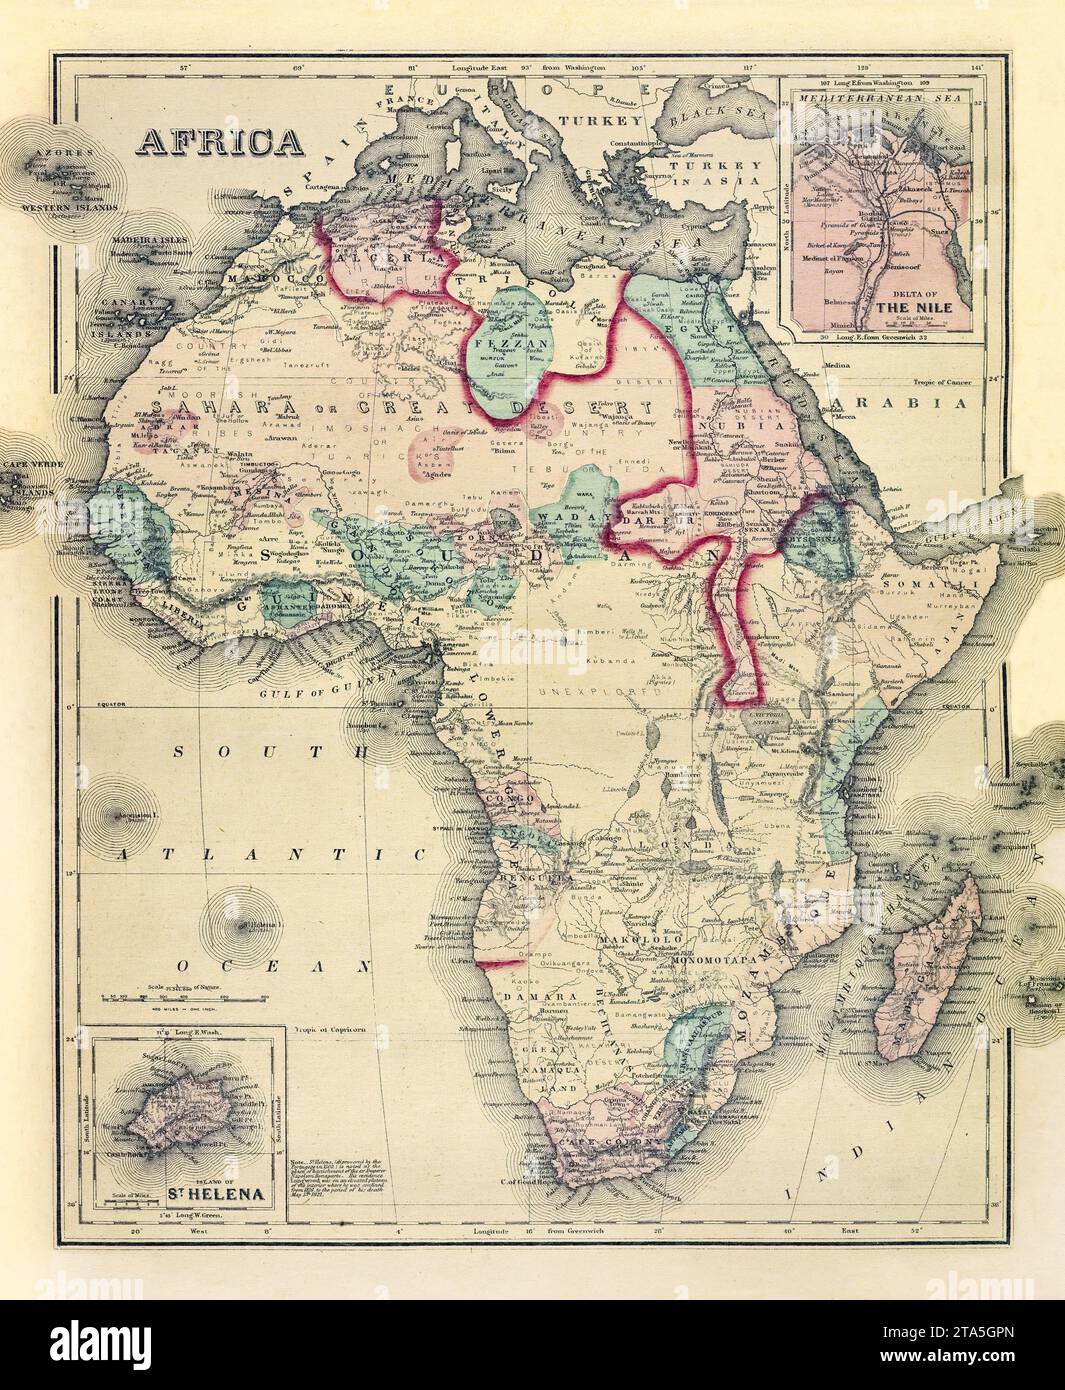 Old map of Africa with St. Helena and Delta of  Nile insert maps. By Gray and Davis, publ. in Philadelphia, 1814 Stock Photo